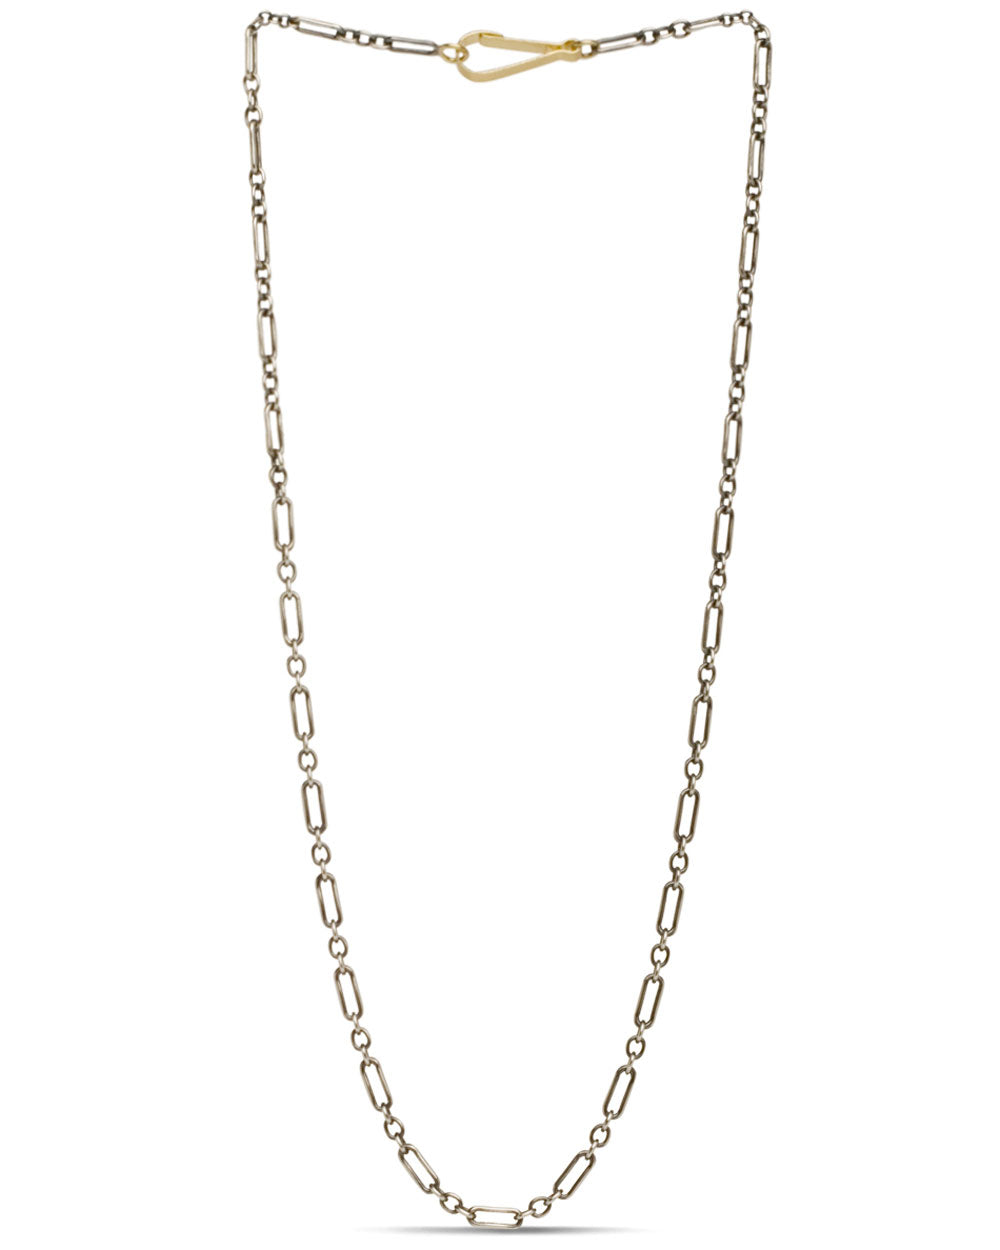 Sterling Silver and Yellow Gold Vintage Style Chain Necklace